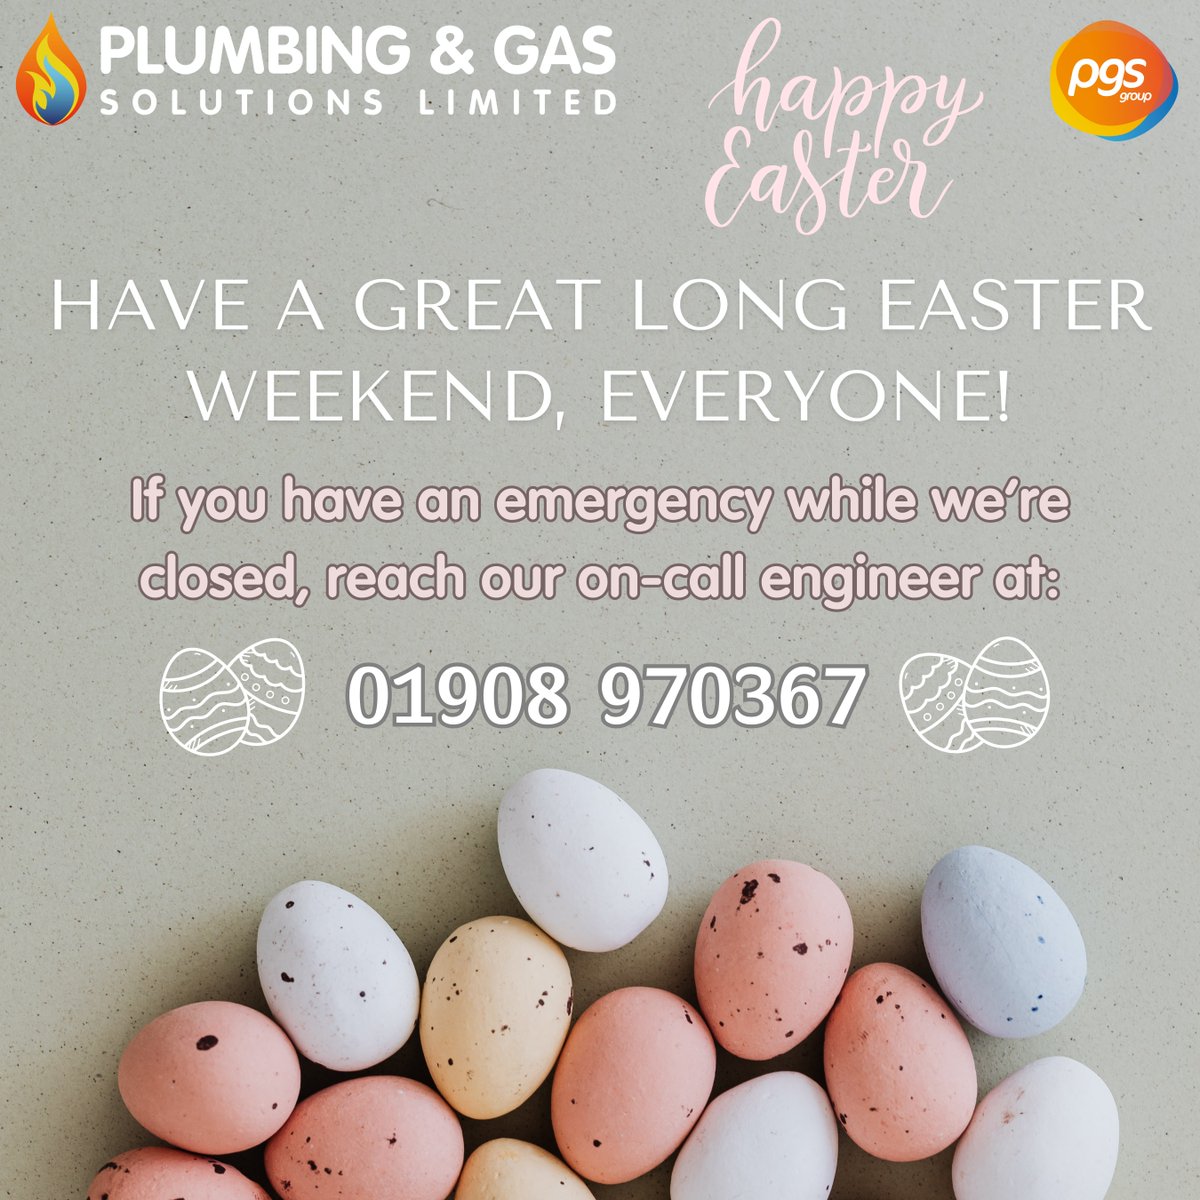 Have a great Easter, everyone! 🐣🍫 Our office is closed for the long weekend. Don't worry, though. If you have an emergency, we still have an on-call engineer available to deal with urgent issues. For any plumbing or gas-related emergencies, call PGS. 01908 970367 📞